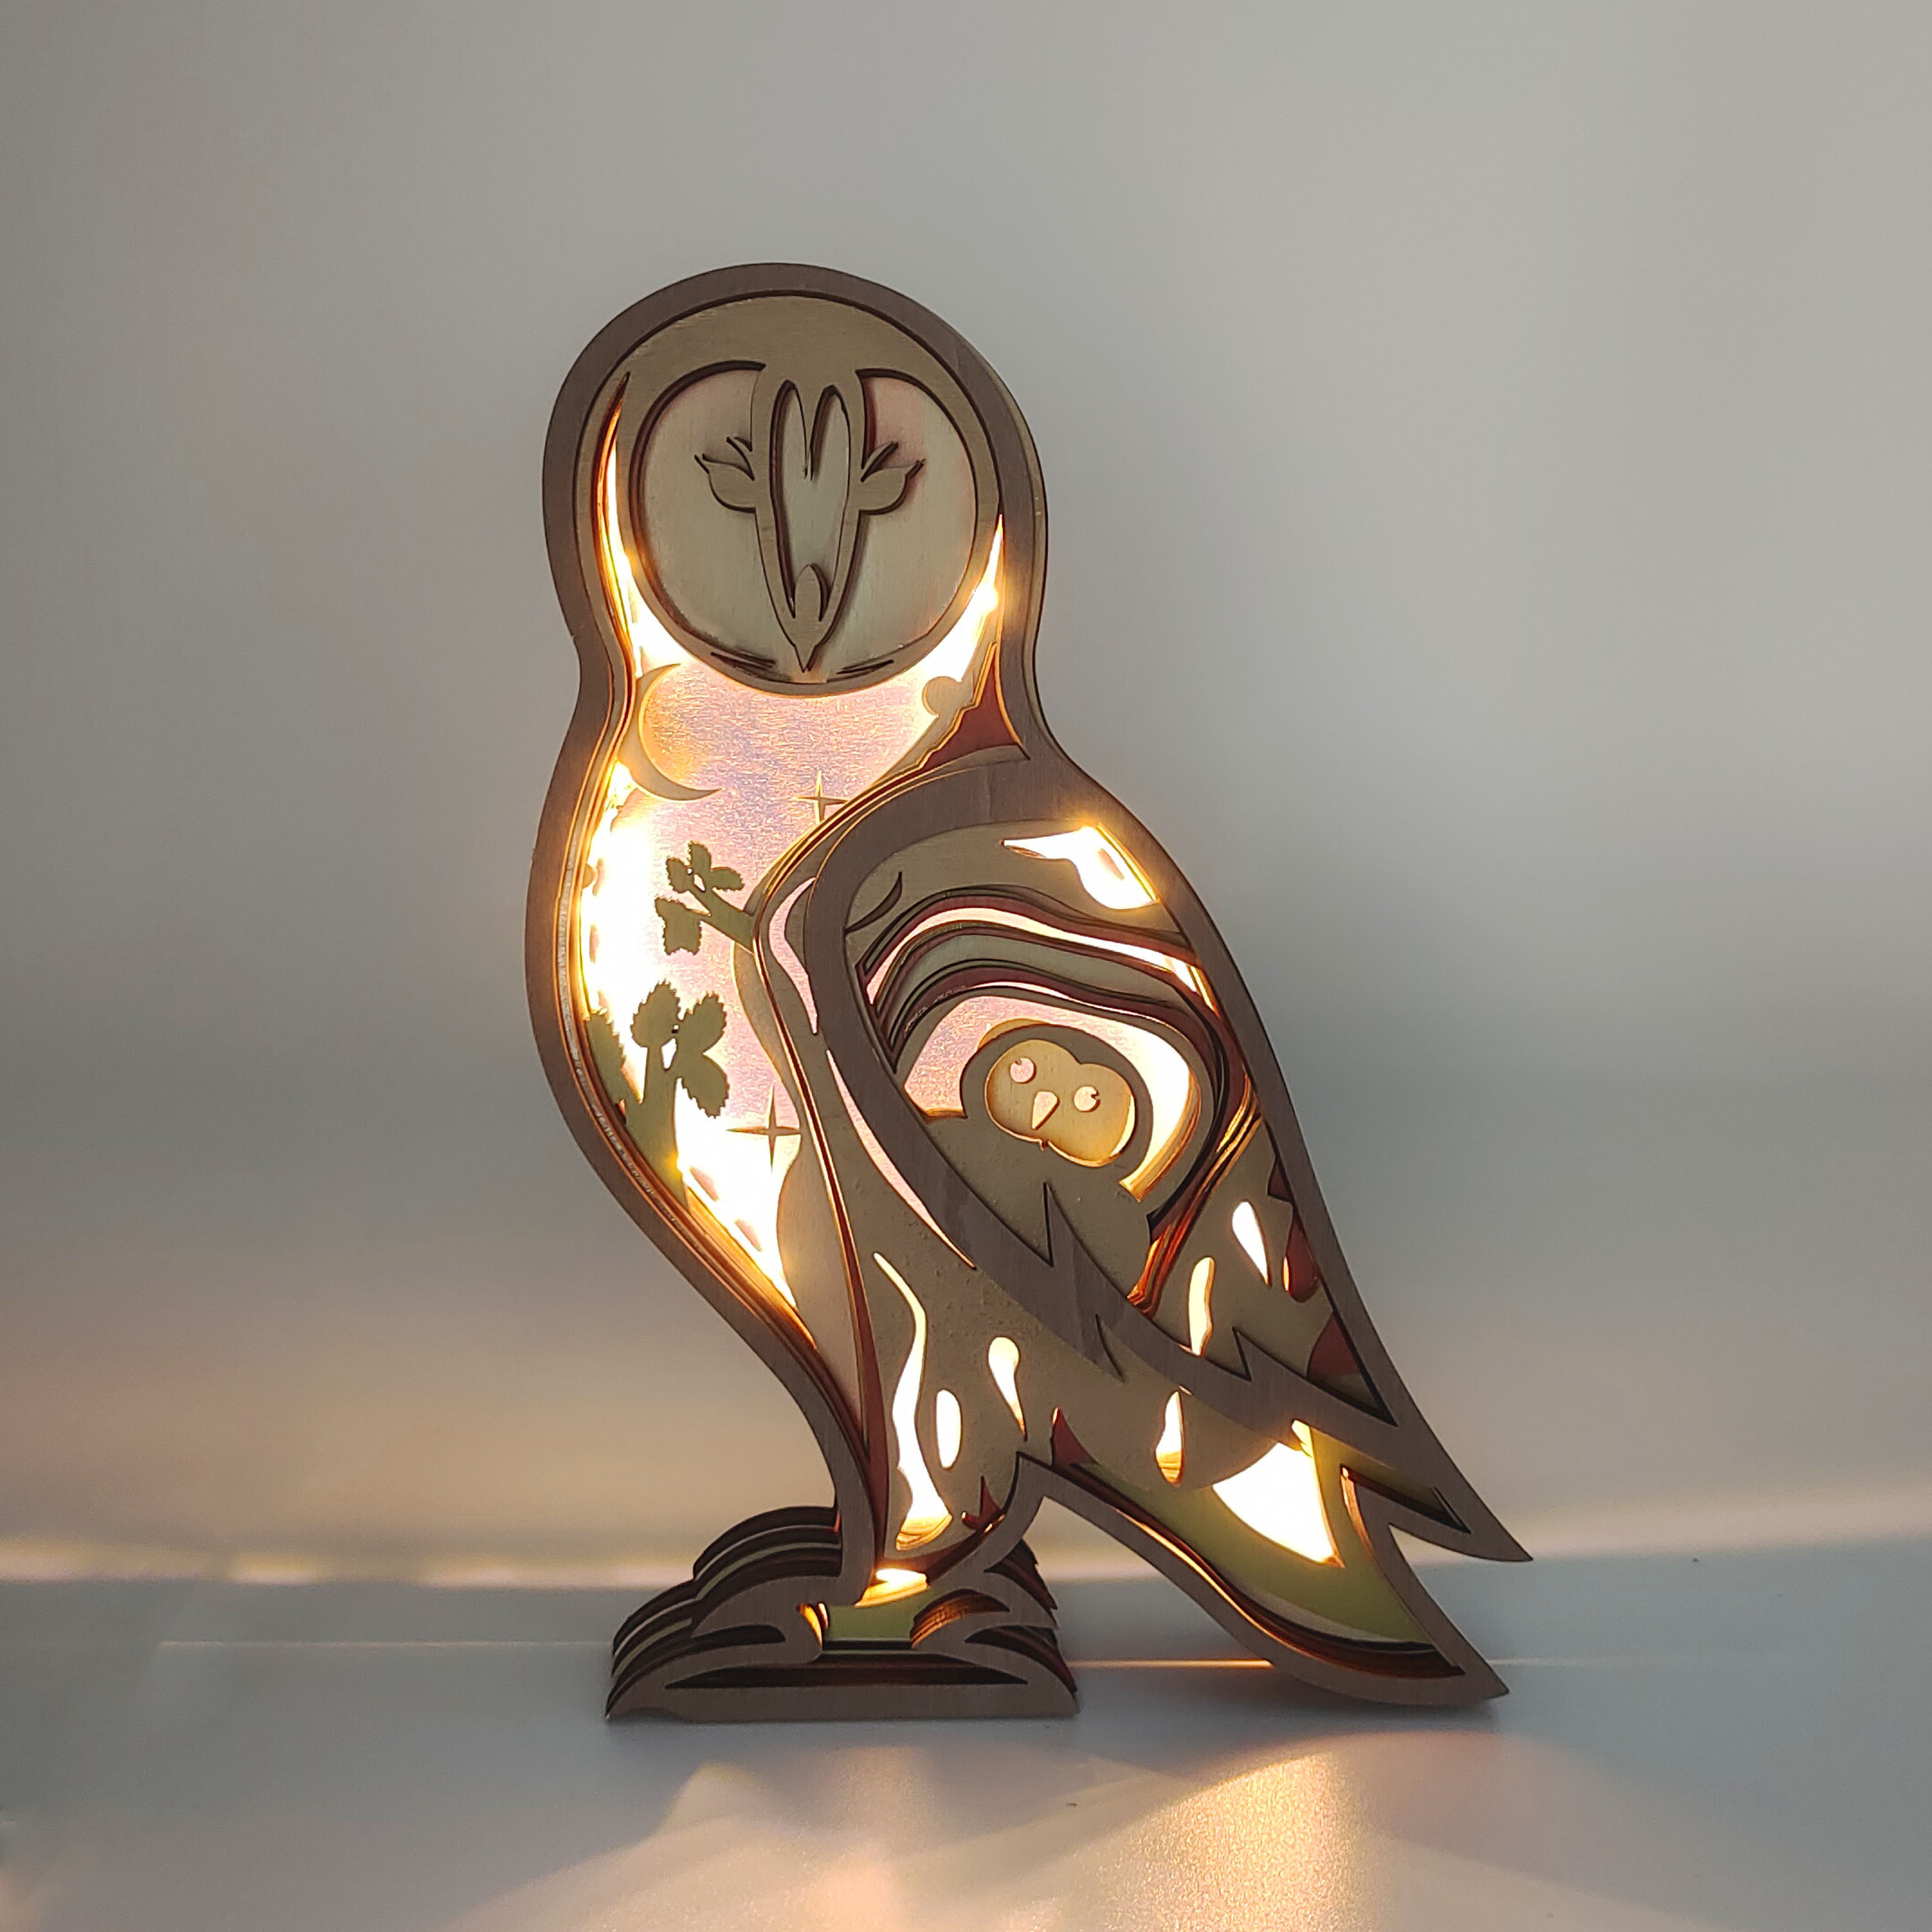 HOT SALE - Owl Carving Handcraft Gift